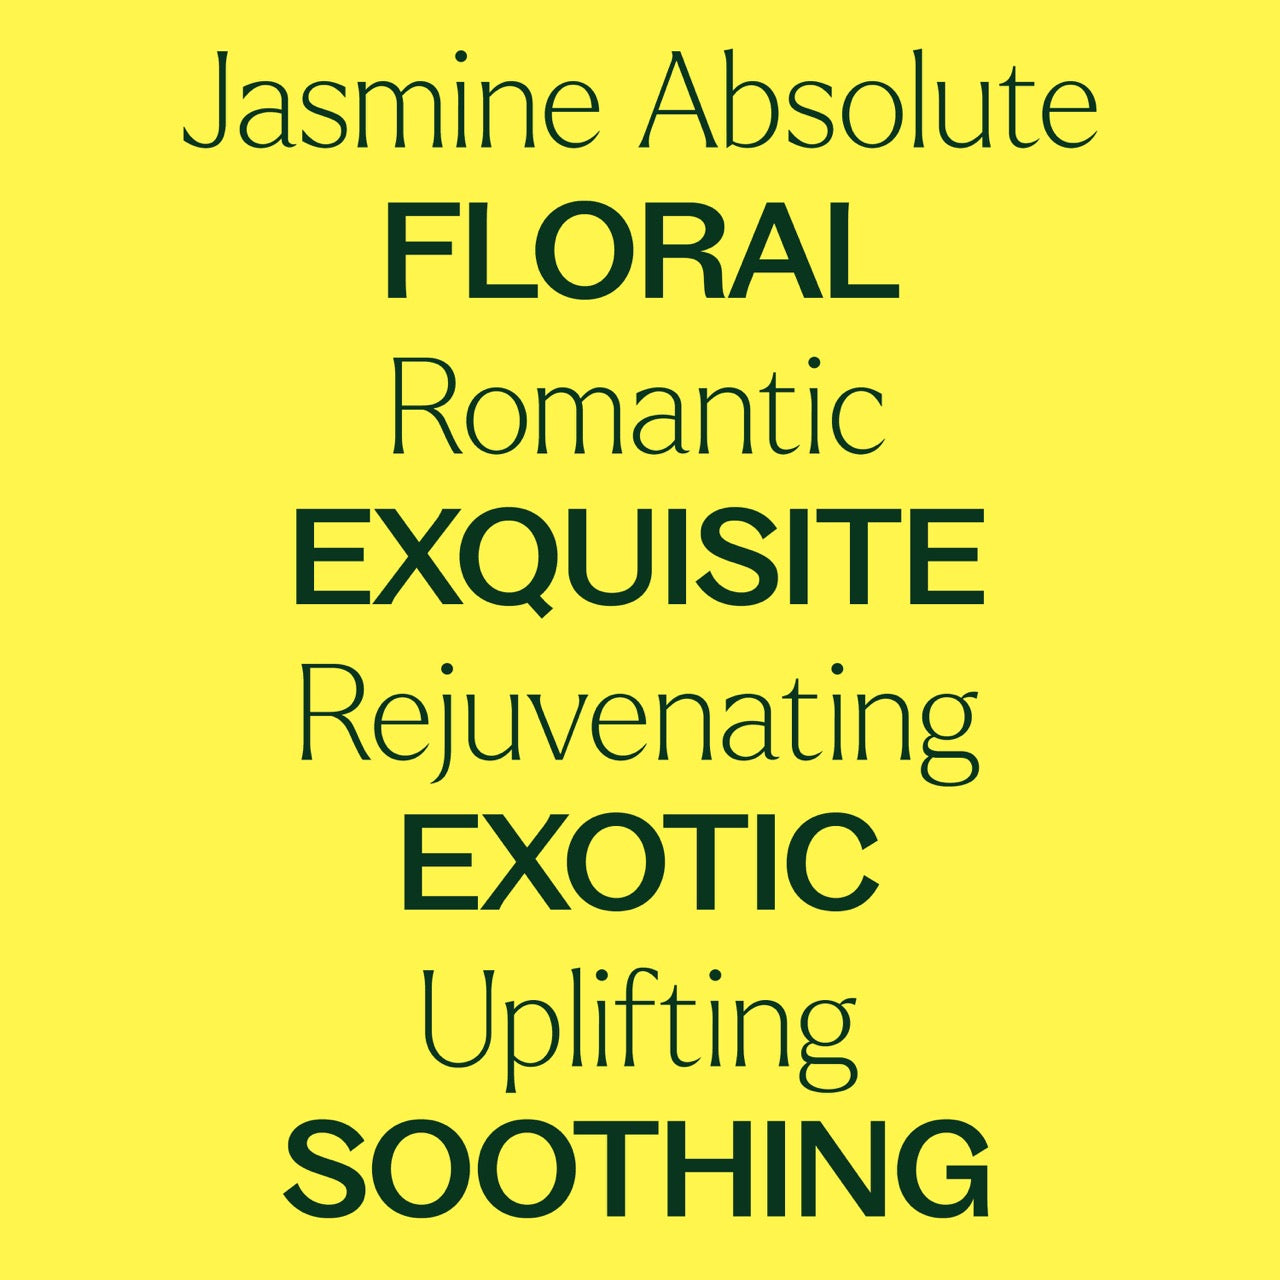 Jasmine Absolute key features: floral, romantic, exquisite, rejuvenating, exotic, uplifting, soothing